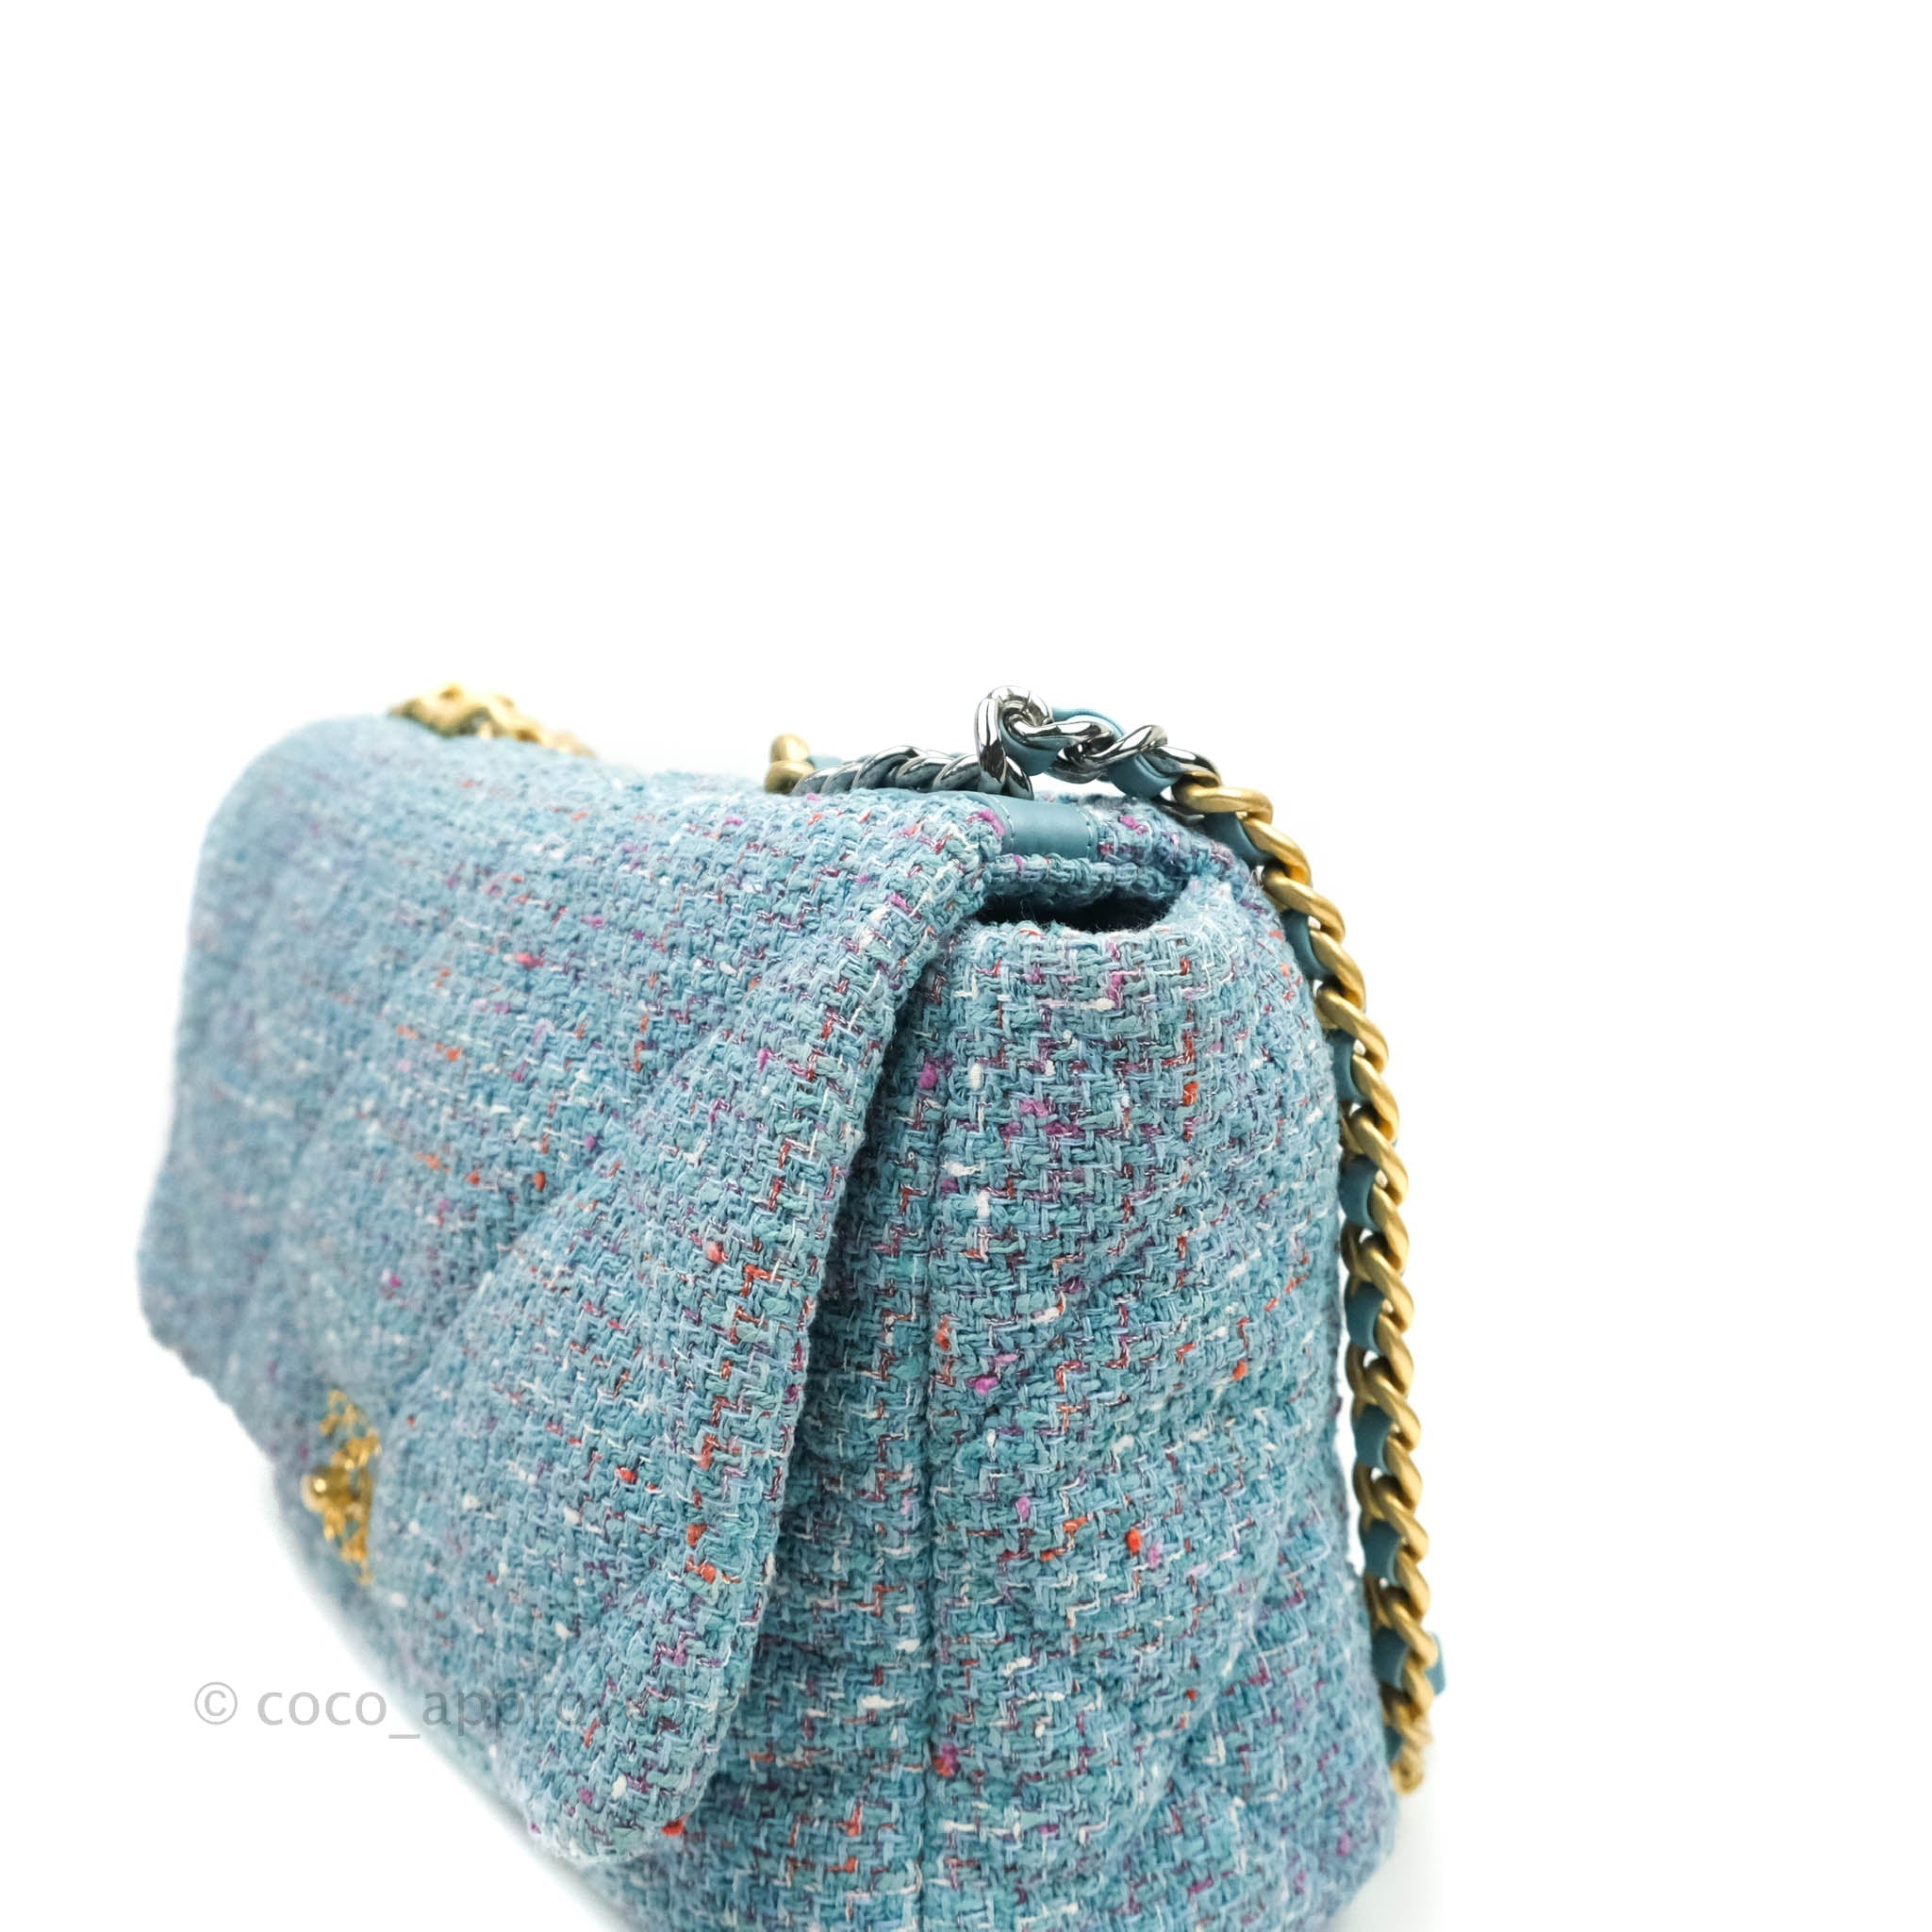 Chanel 19 Maxi Flap Bag Blue Tweed Mixed Hardware – Coco Approved Studio